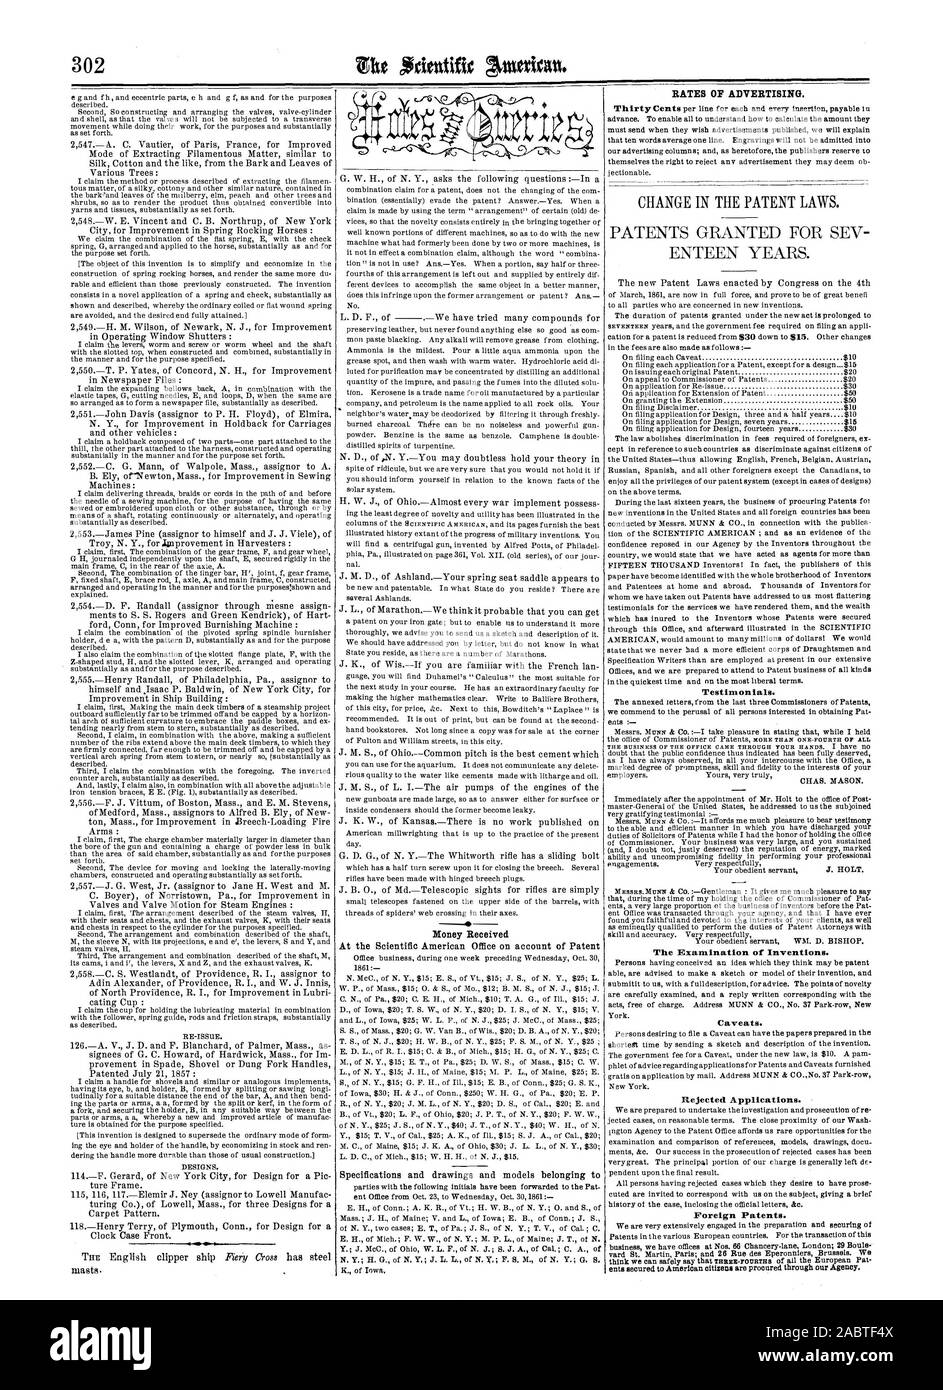 RATES OF ADVERTISING. Testimonials. The Examination of Inventions. Caveats. Rejected Applications. Foreign Patents., scientific american, 1861-11-09 Stock Photo